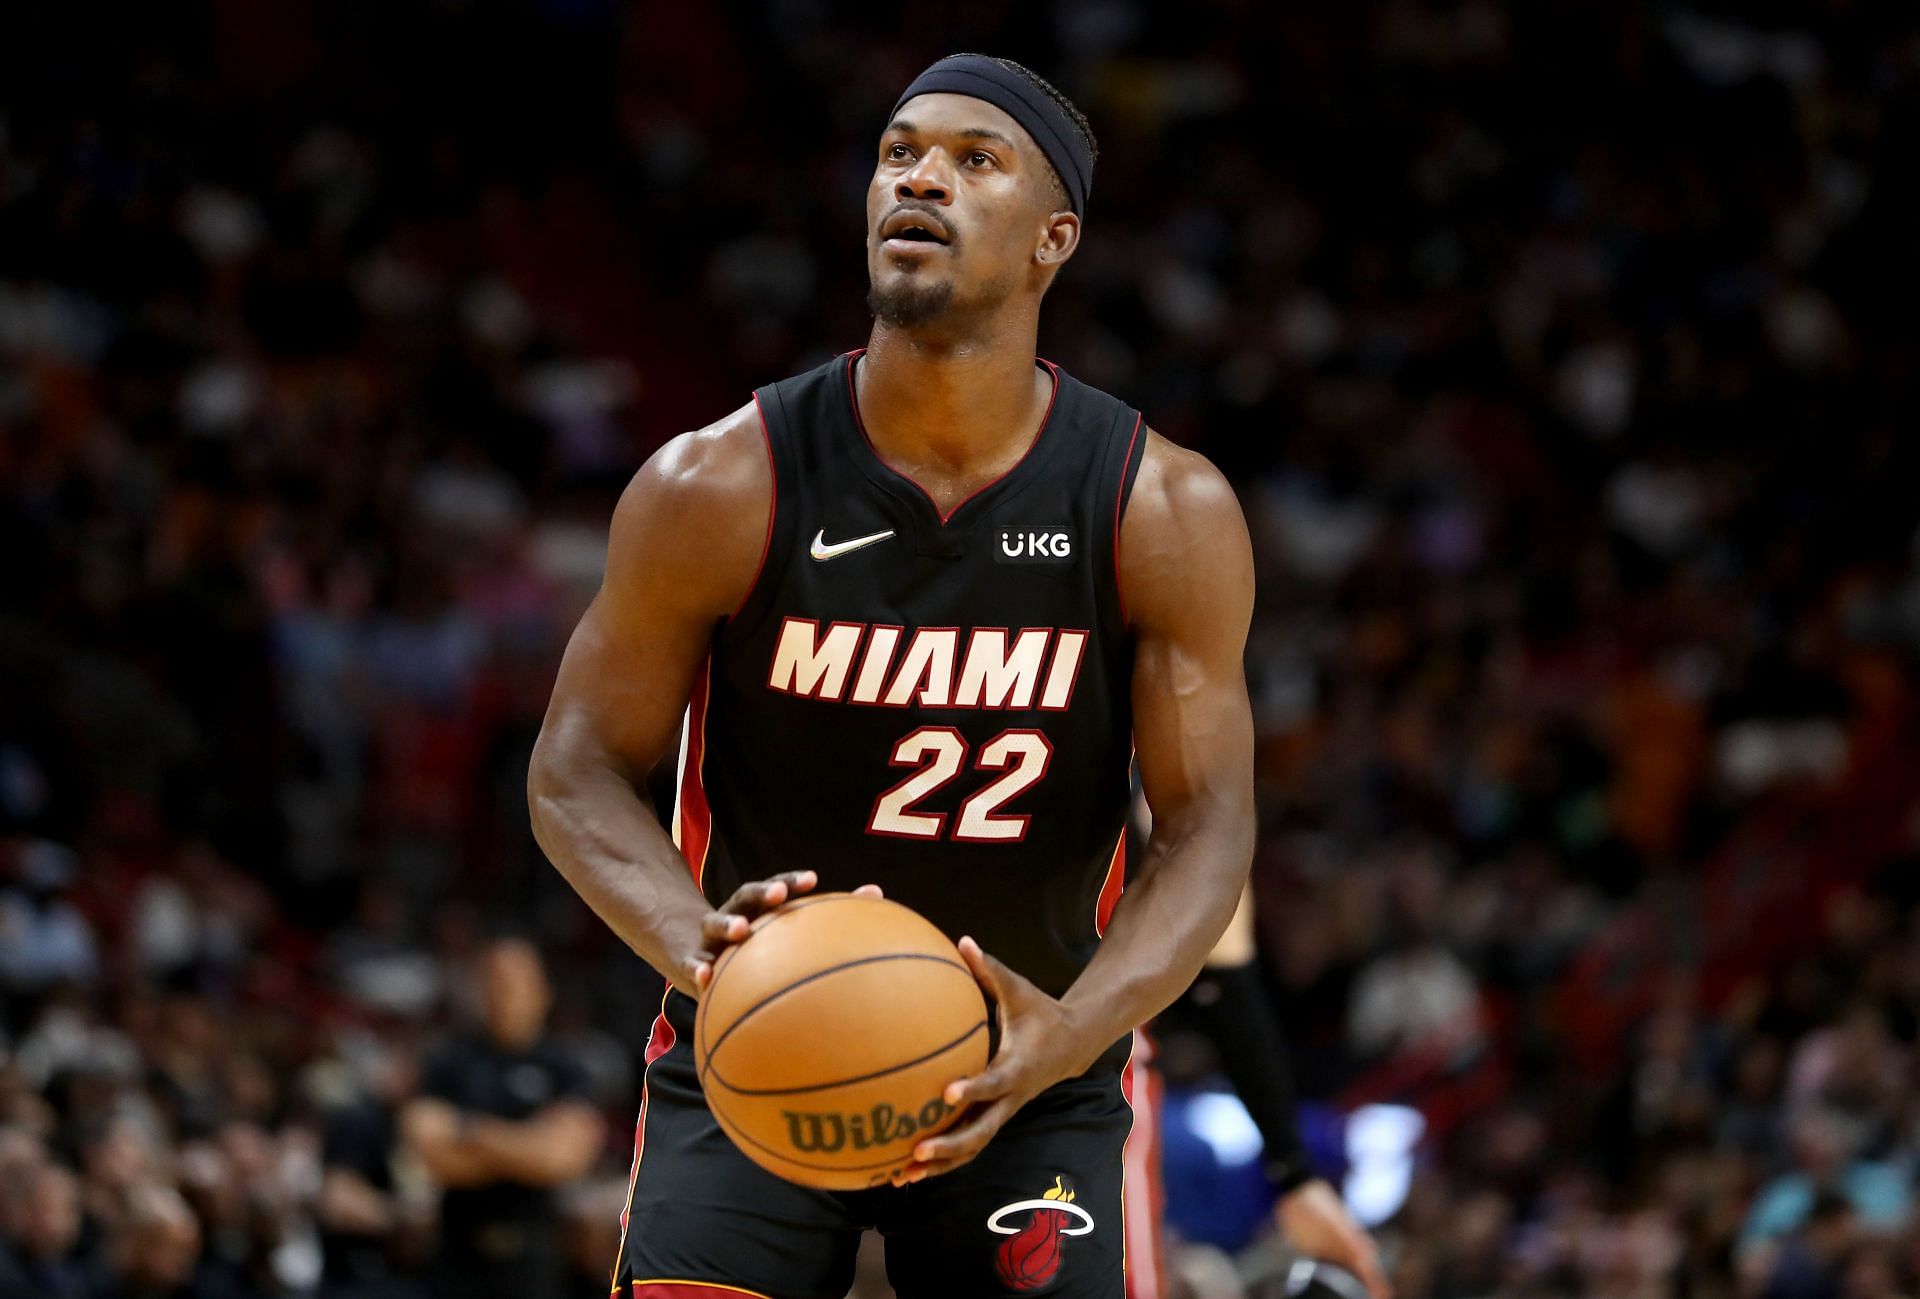 Jimmy Butler #22 of the Miami Heat shoots a free throw.